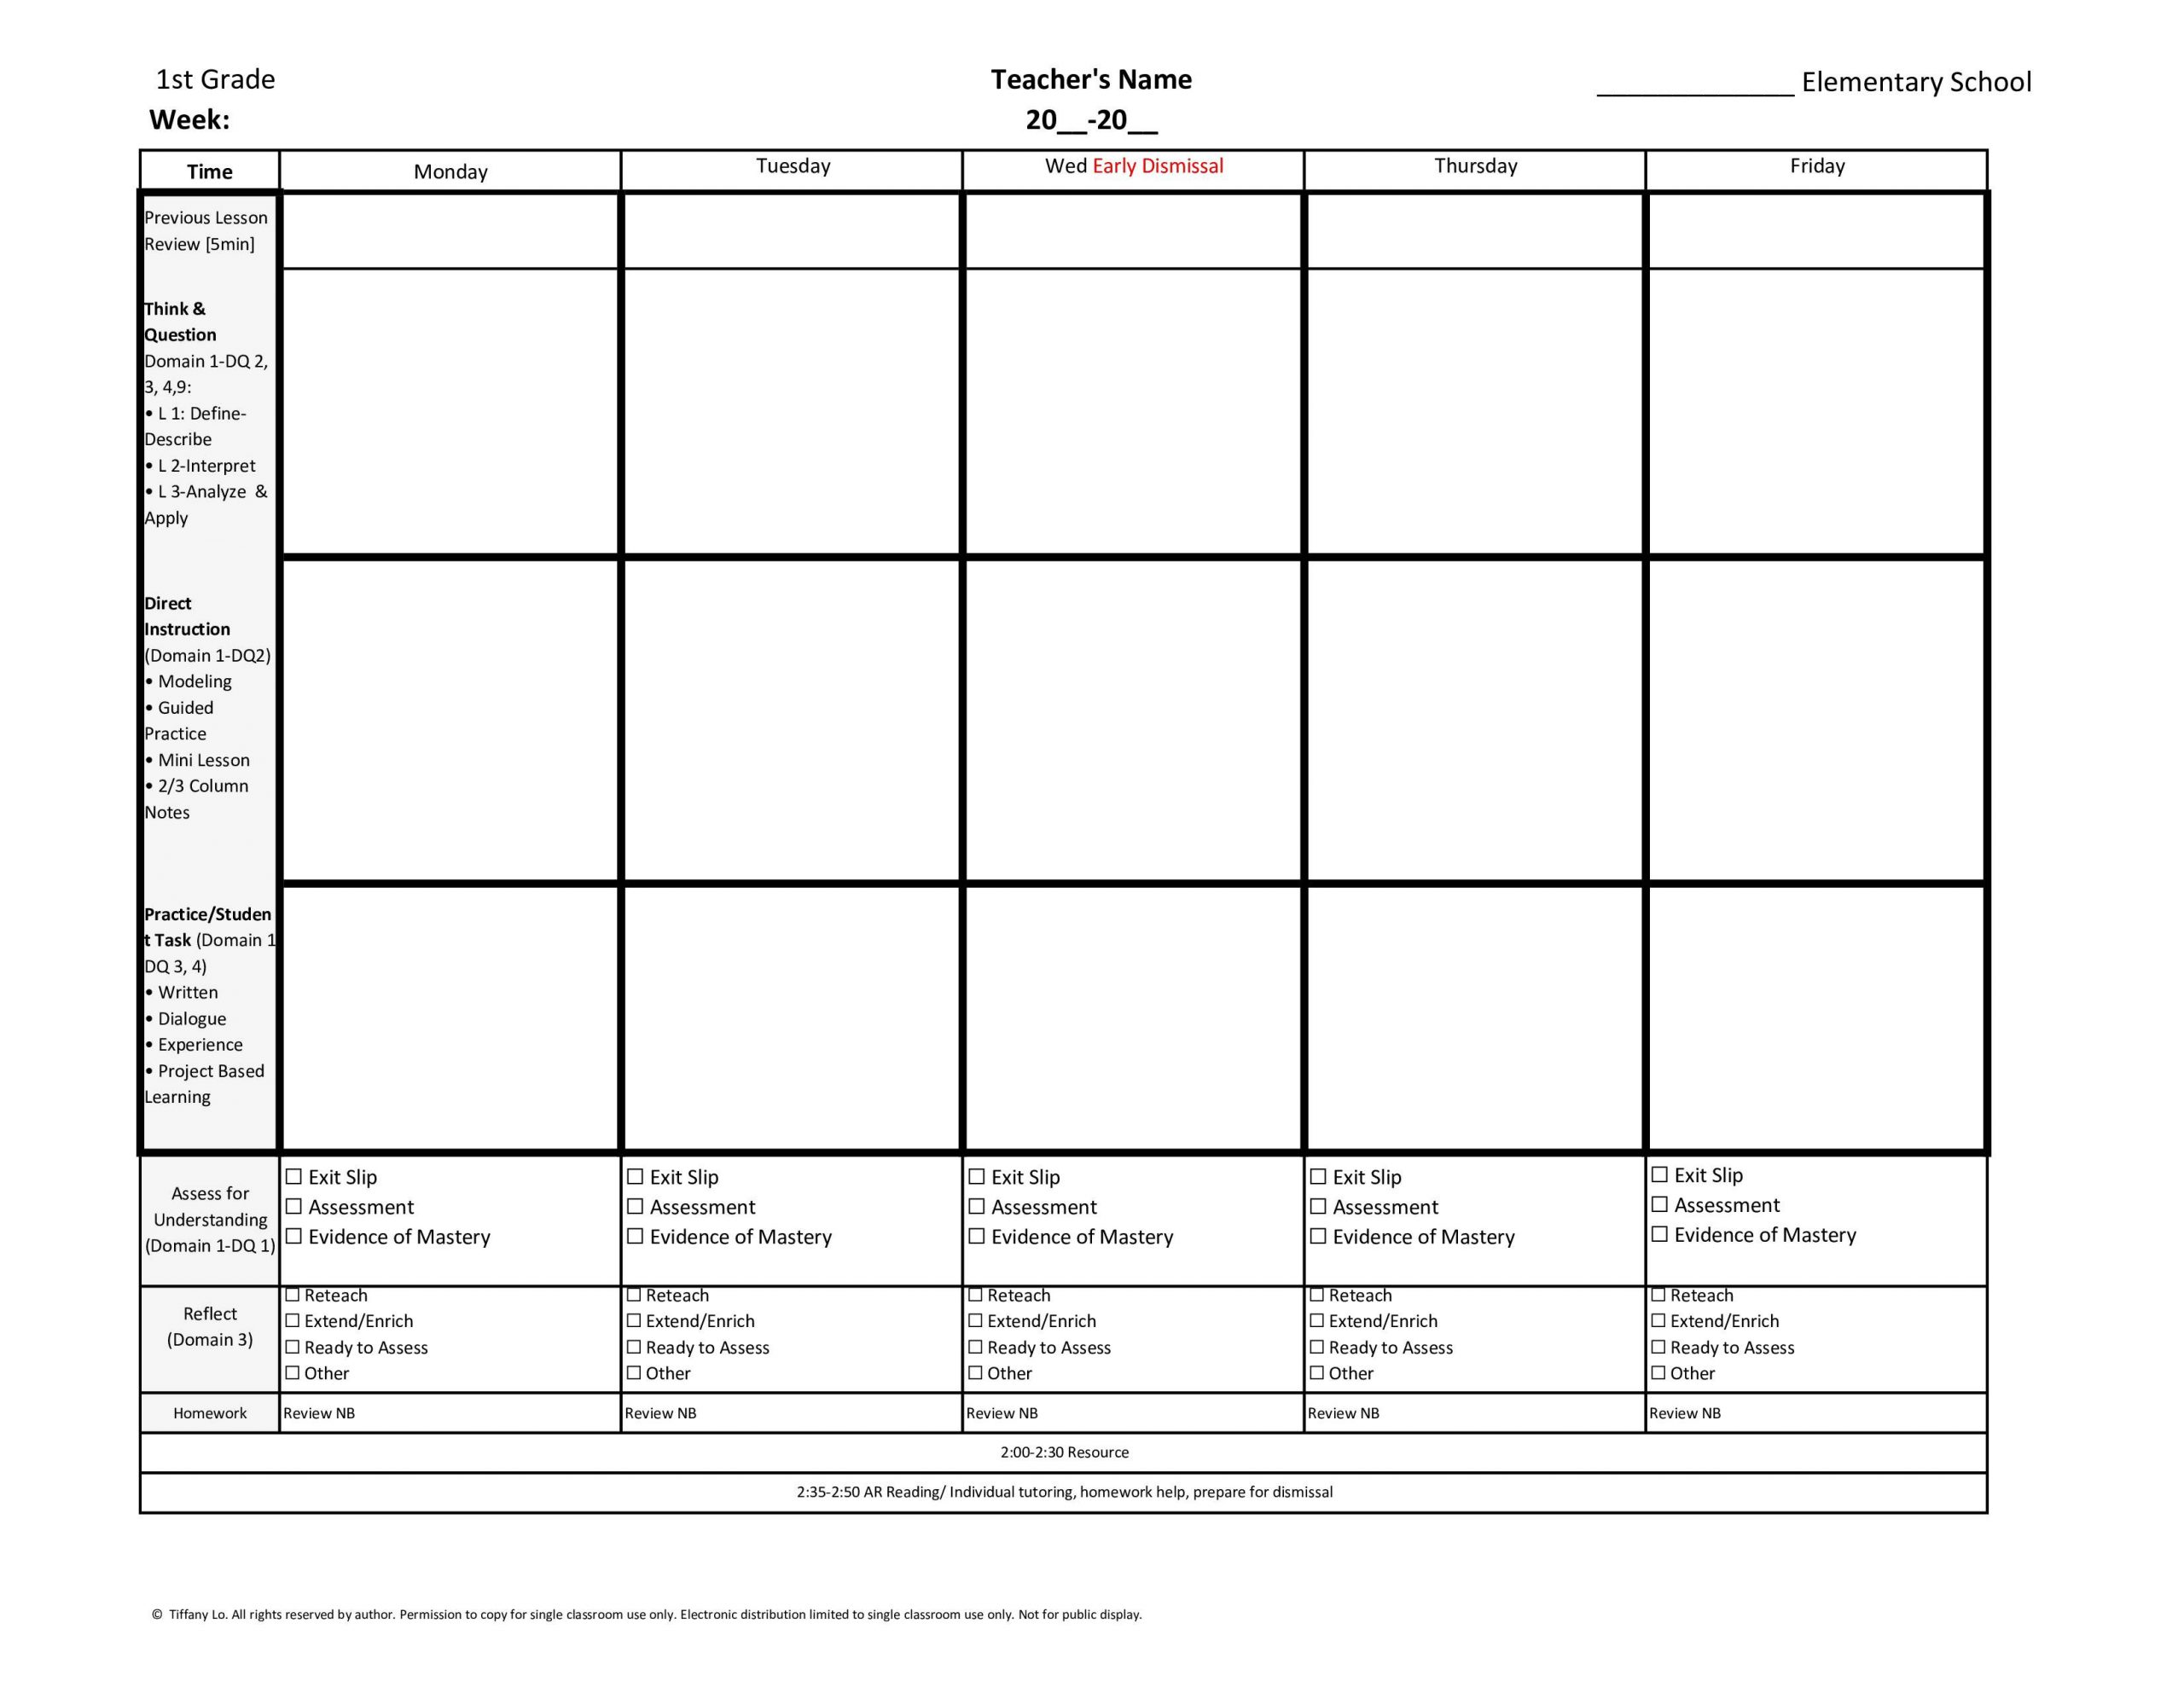 1st first grade mon core weekly lesson plan template w drop down lists